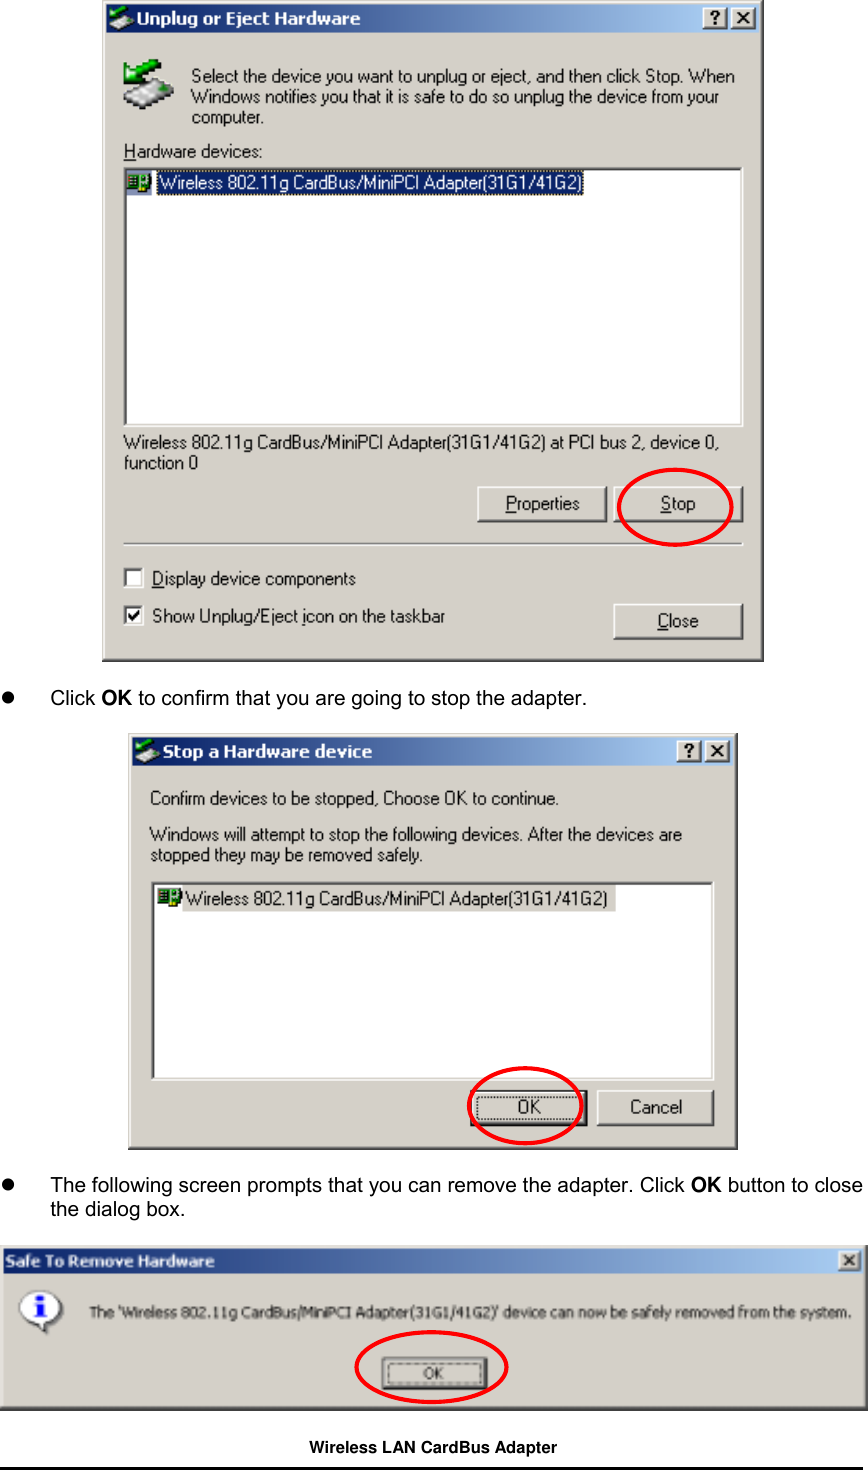     Click OK to confirm that you are going to stop the adapter.        The following screen prompts that you can remove the adapter. Click OK button to close the dialog box.   Wireless LAN CardBus Adapter  